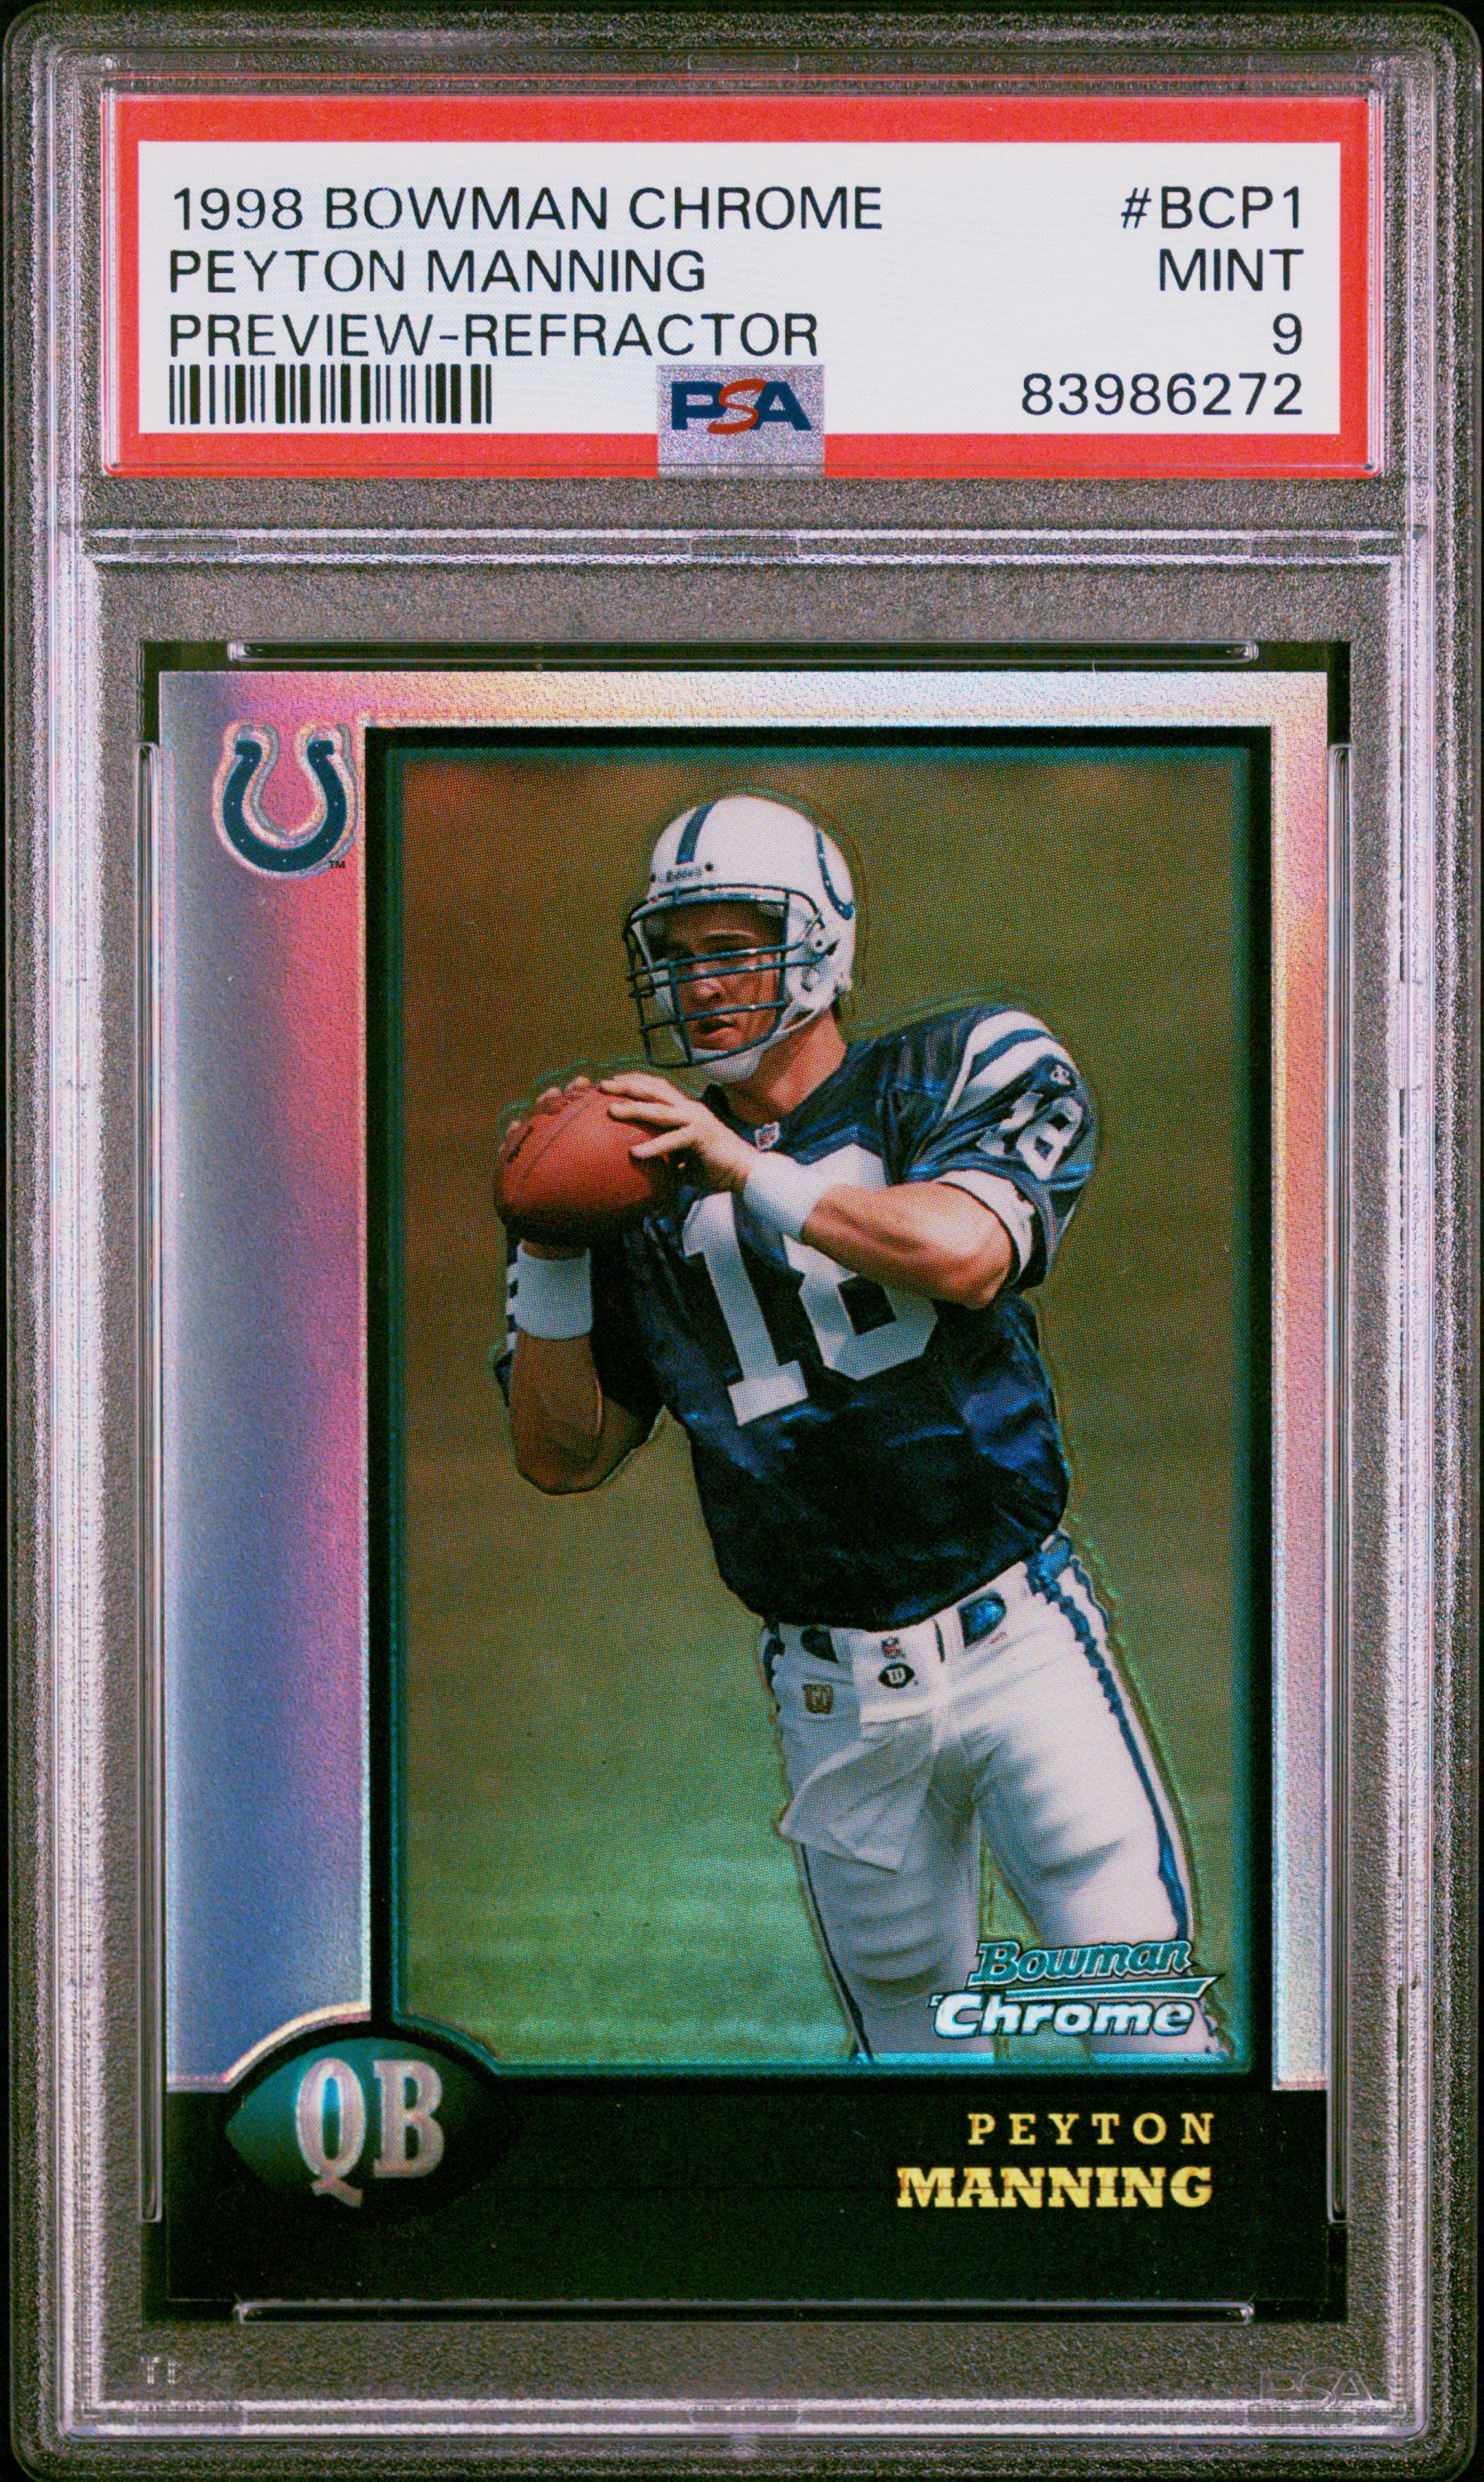 1998 Bowman Chrome Preview Refractor #BCP1 Peyton Manning Rookie Card – PSA MINT 9